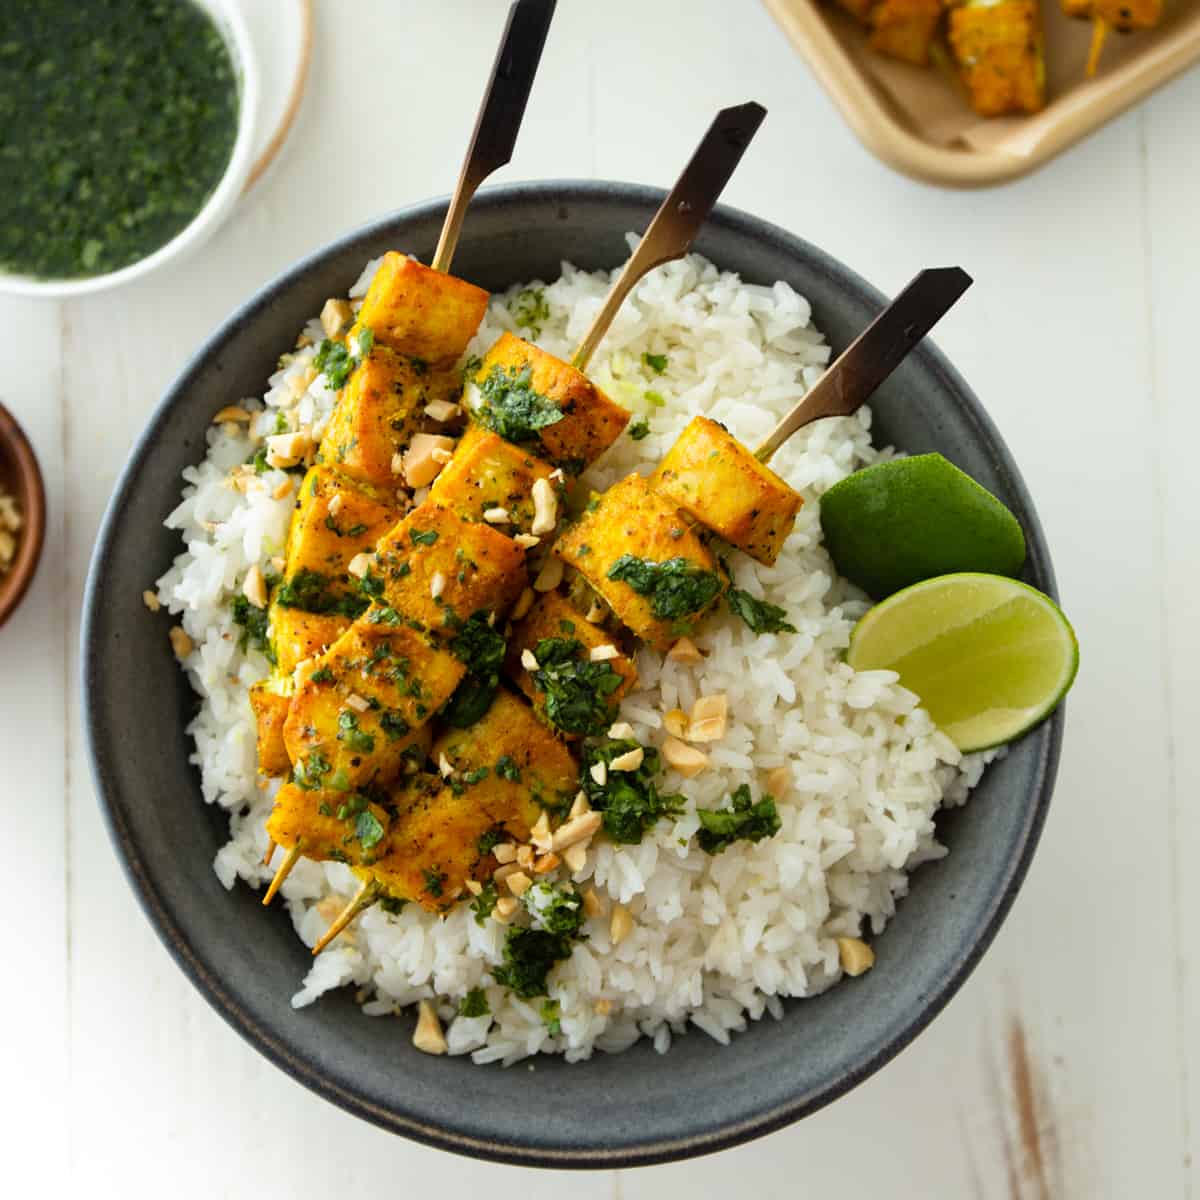 fish skewers on a bed of rice in a black bowl